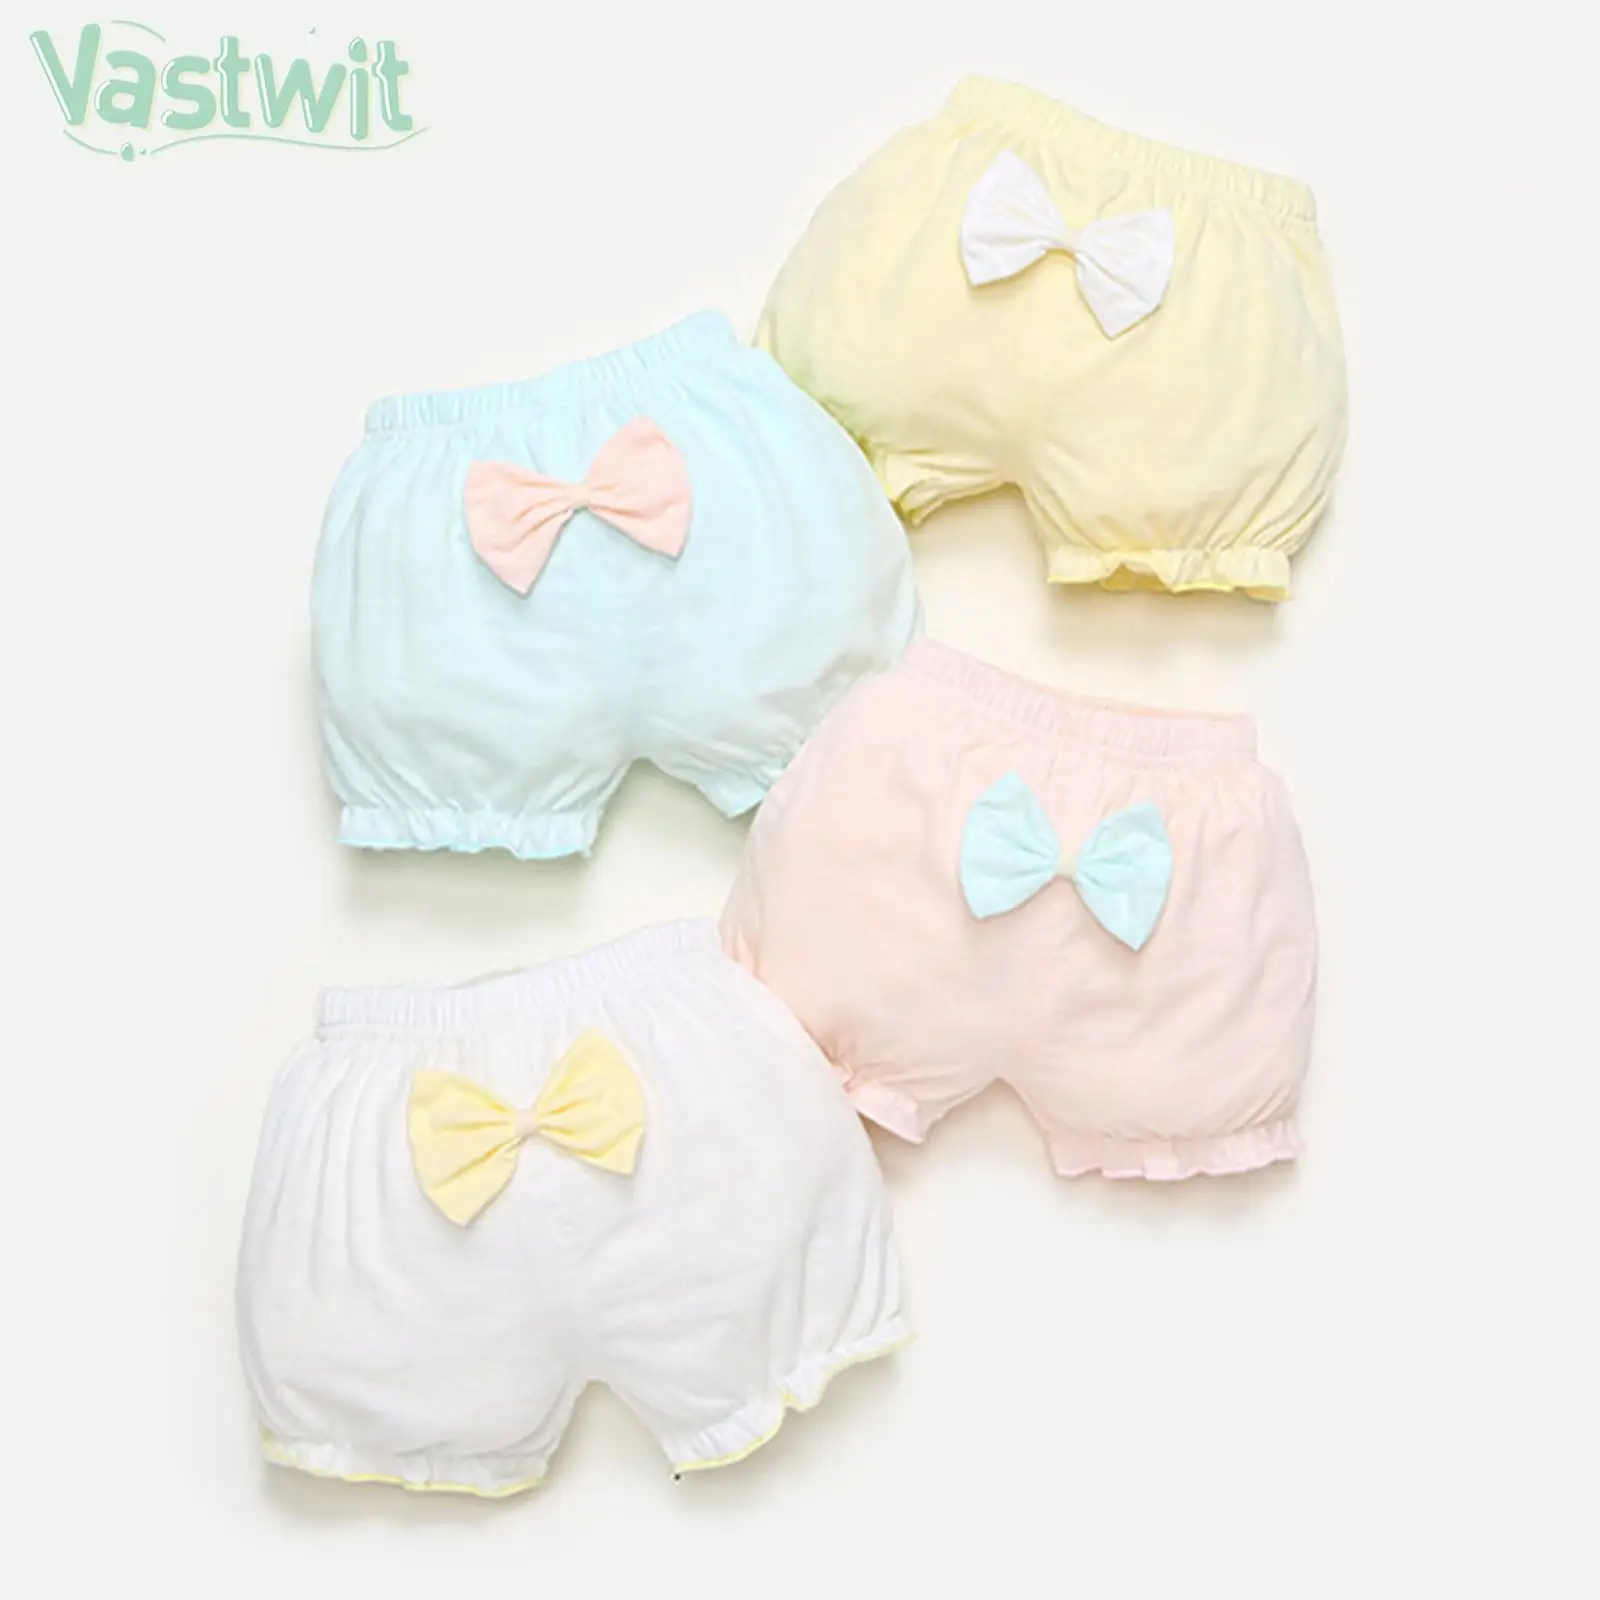 

4 Pcs Set Baby Girls Diapers Cover Summer Daily Wear Clothing Elastic Waistband Ruffle Edge Bowknot Decor Pure Color Briefs